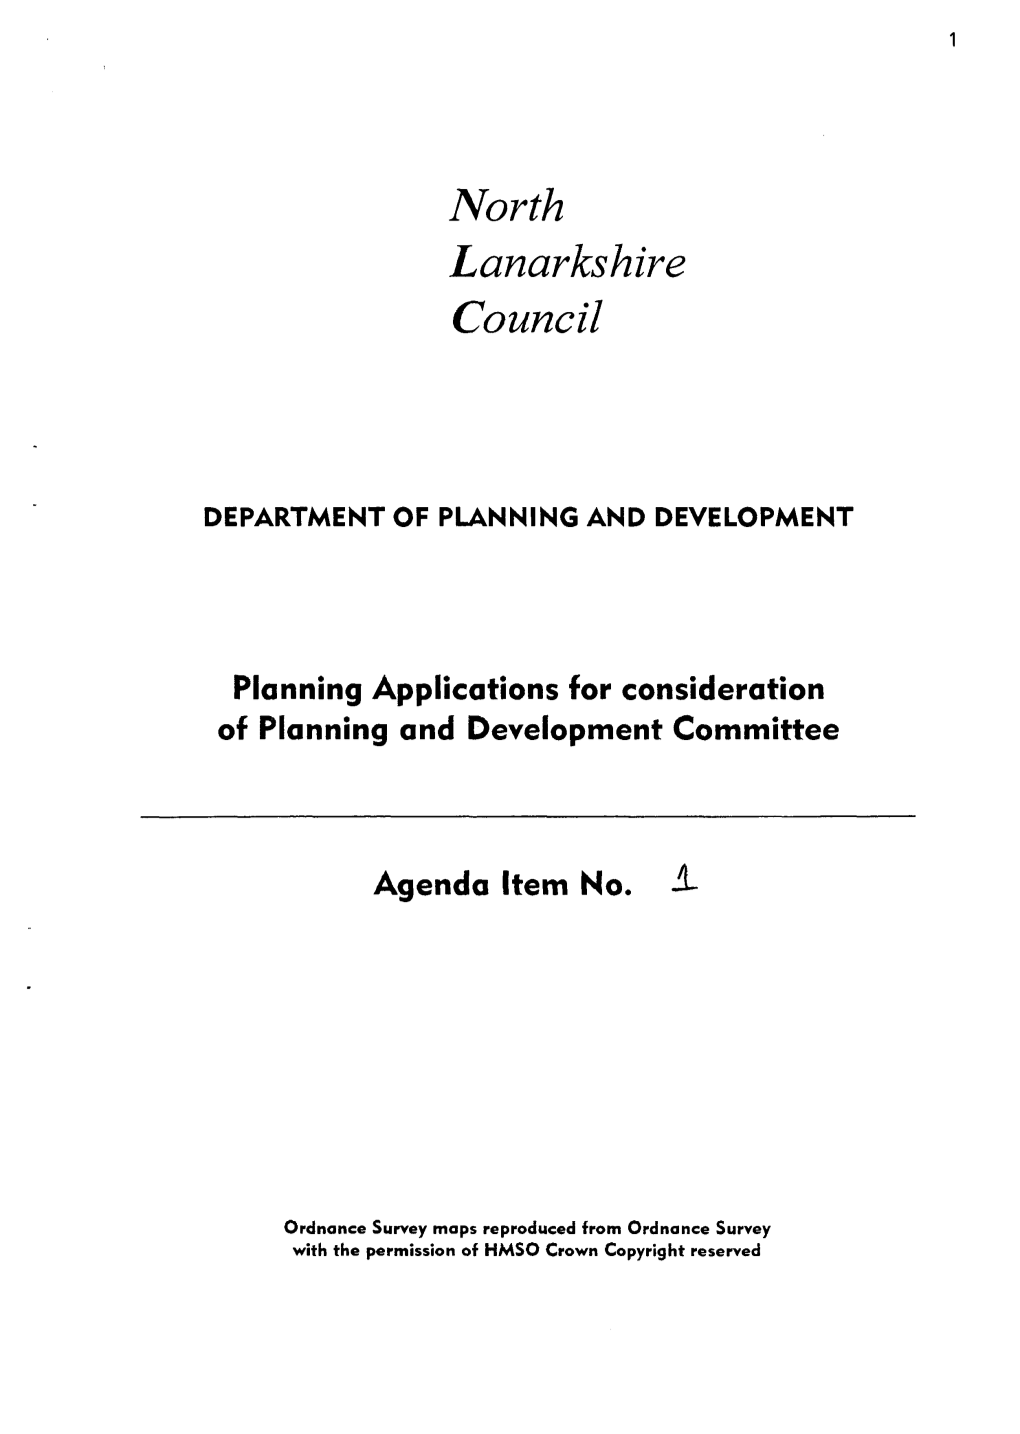 Department of Planning and Development